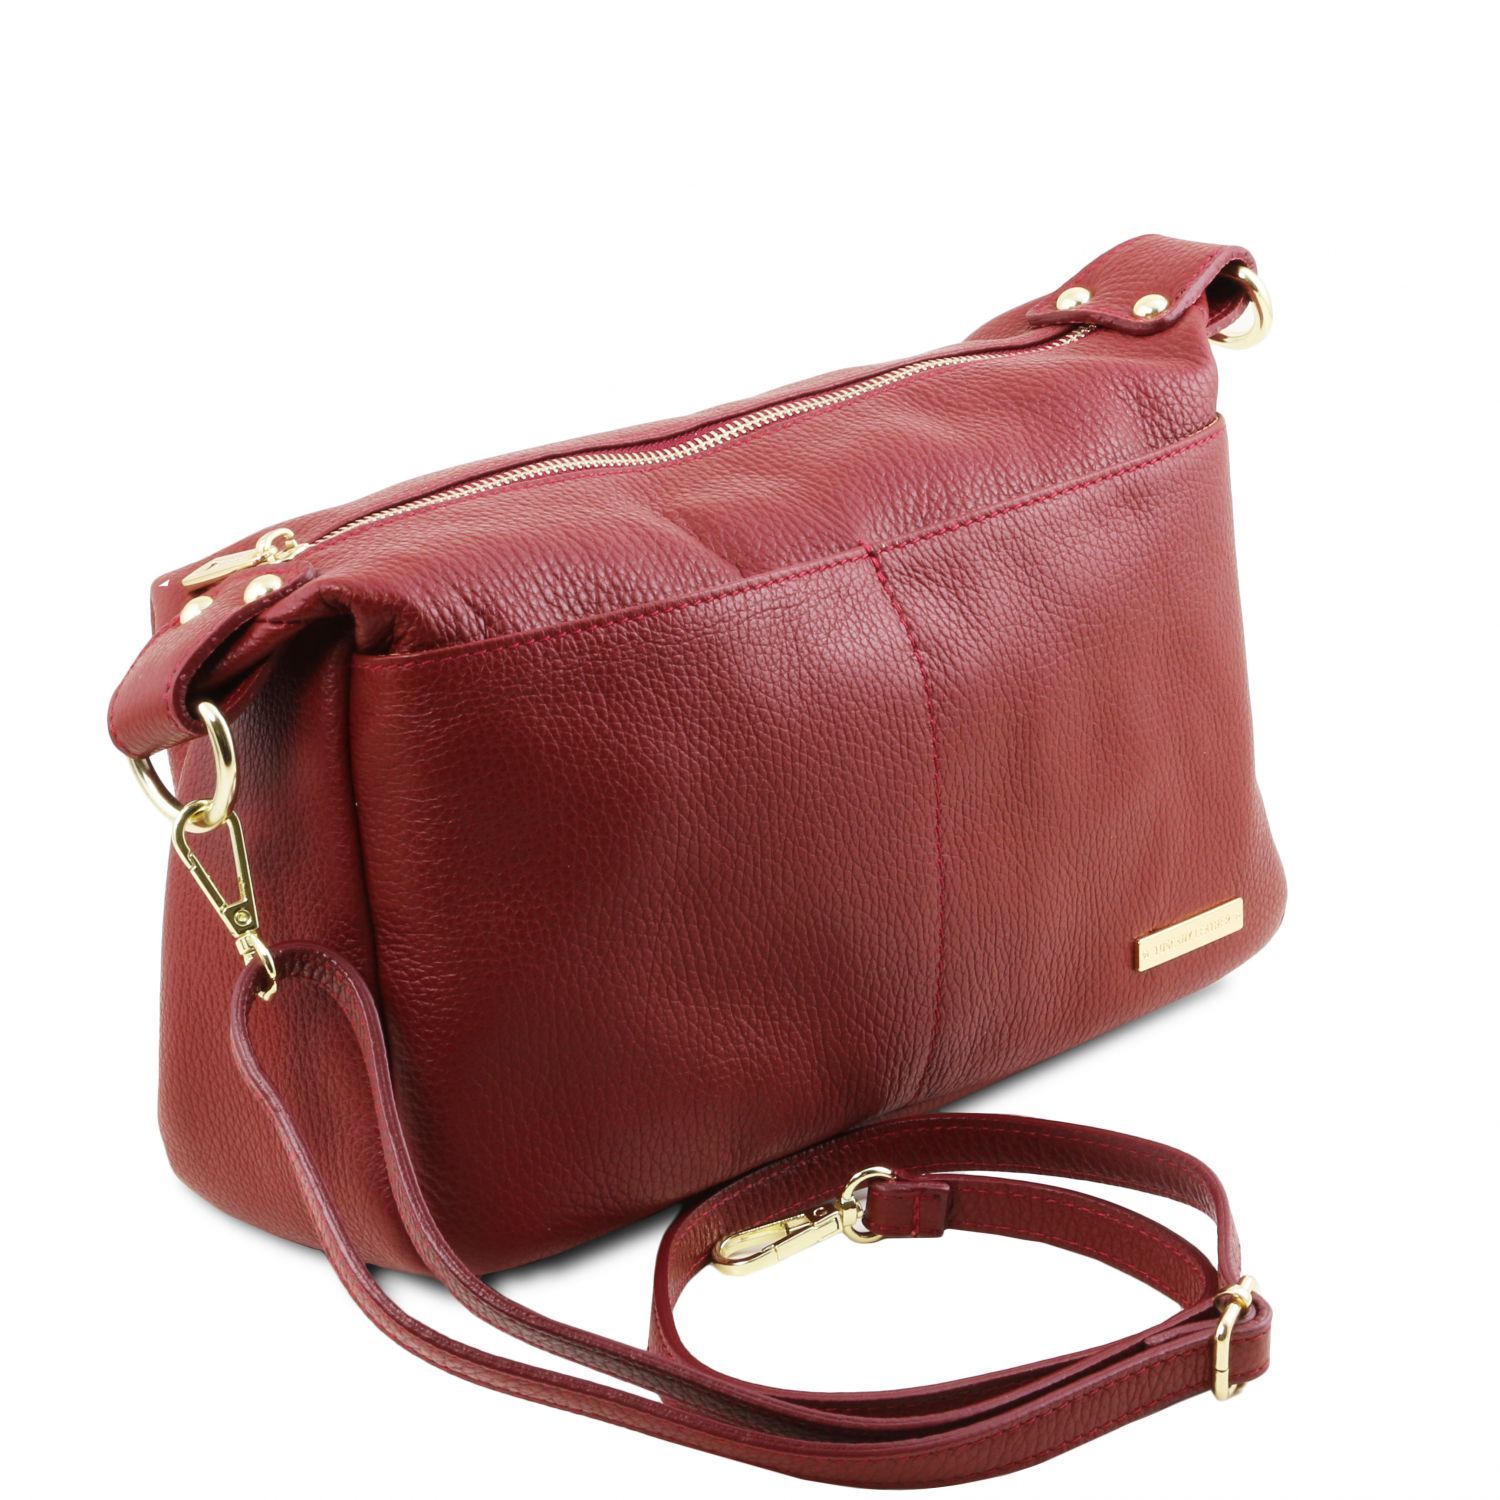 TL Bag Soft Leather Duffle bag Red TL141746